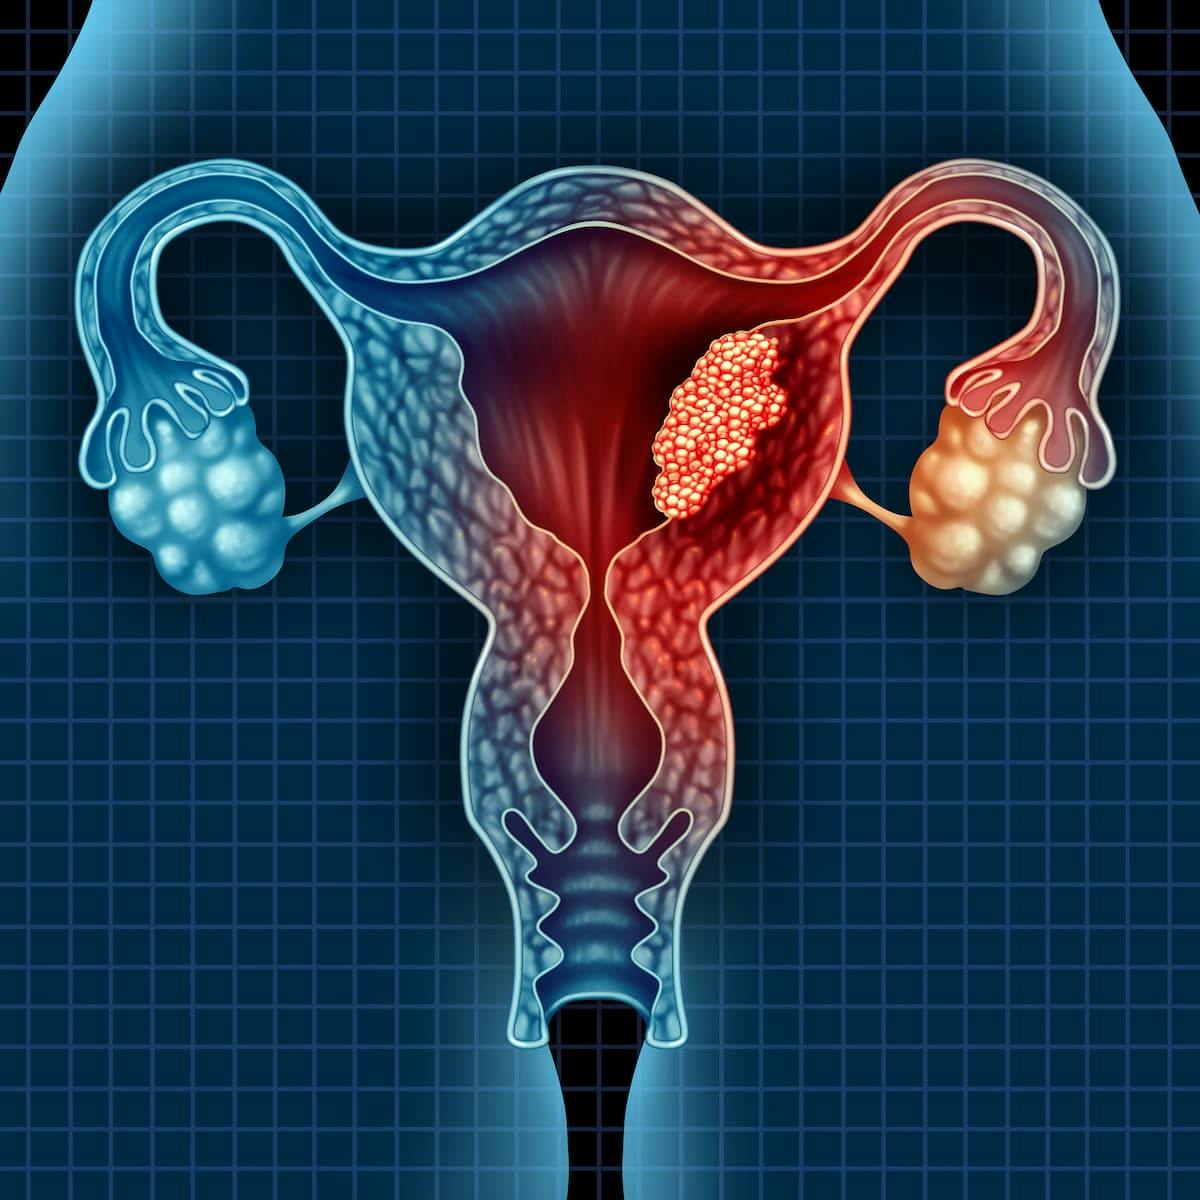 In the phase 2 OATH trial, ONA-XR plus anastrozole produced an overall response rate of 22% among patients with refractory, hormone receptor-positive metastatic endometrial cancer.